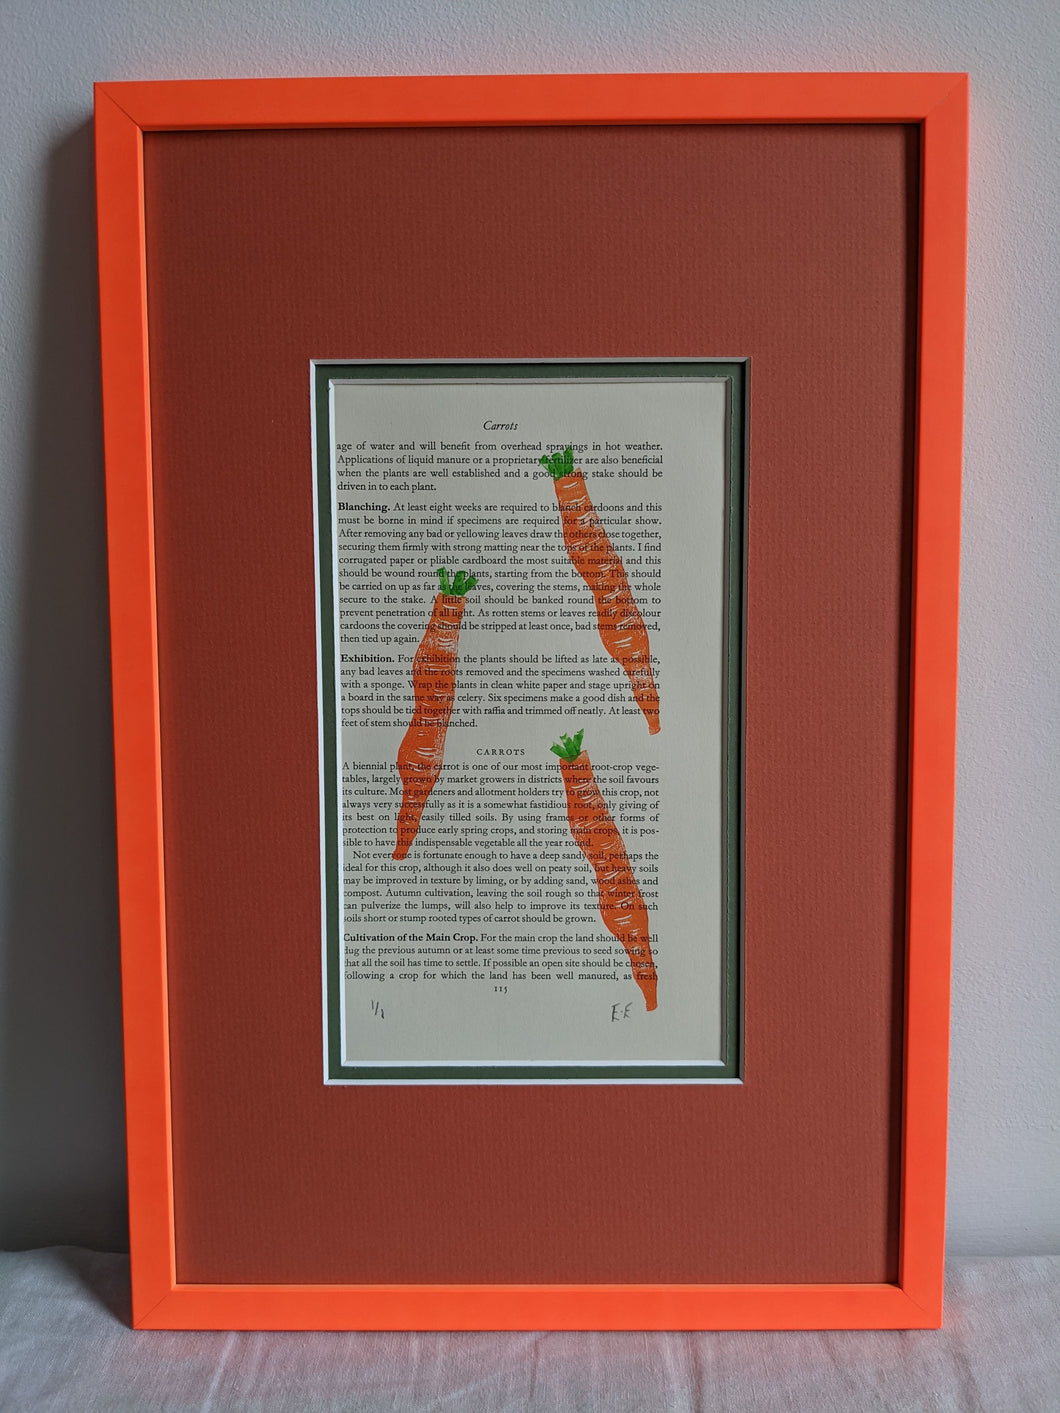 An orange frame with a carrot print on the inside